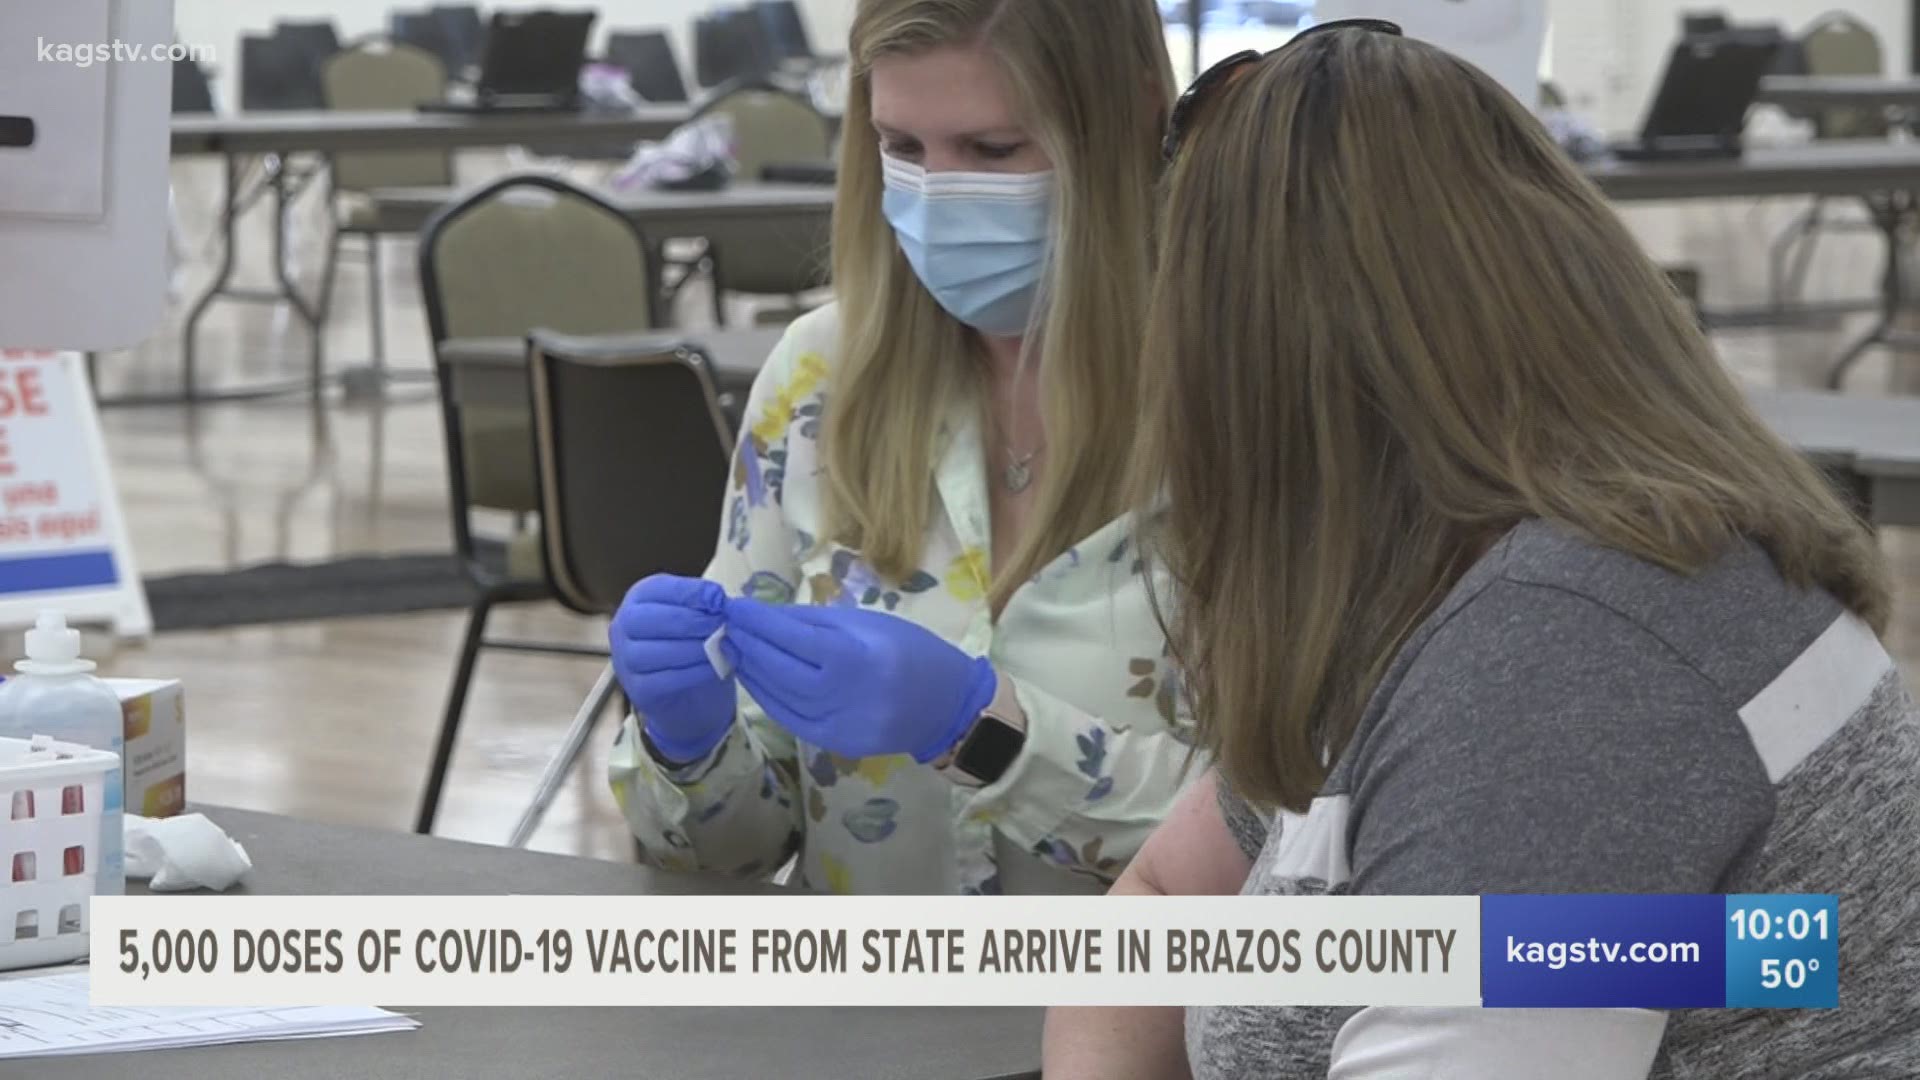 St. Joseph Health received 5,000 doses of the Moderna vaccine from the state Thursday.